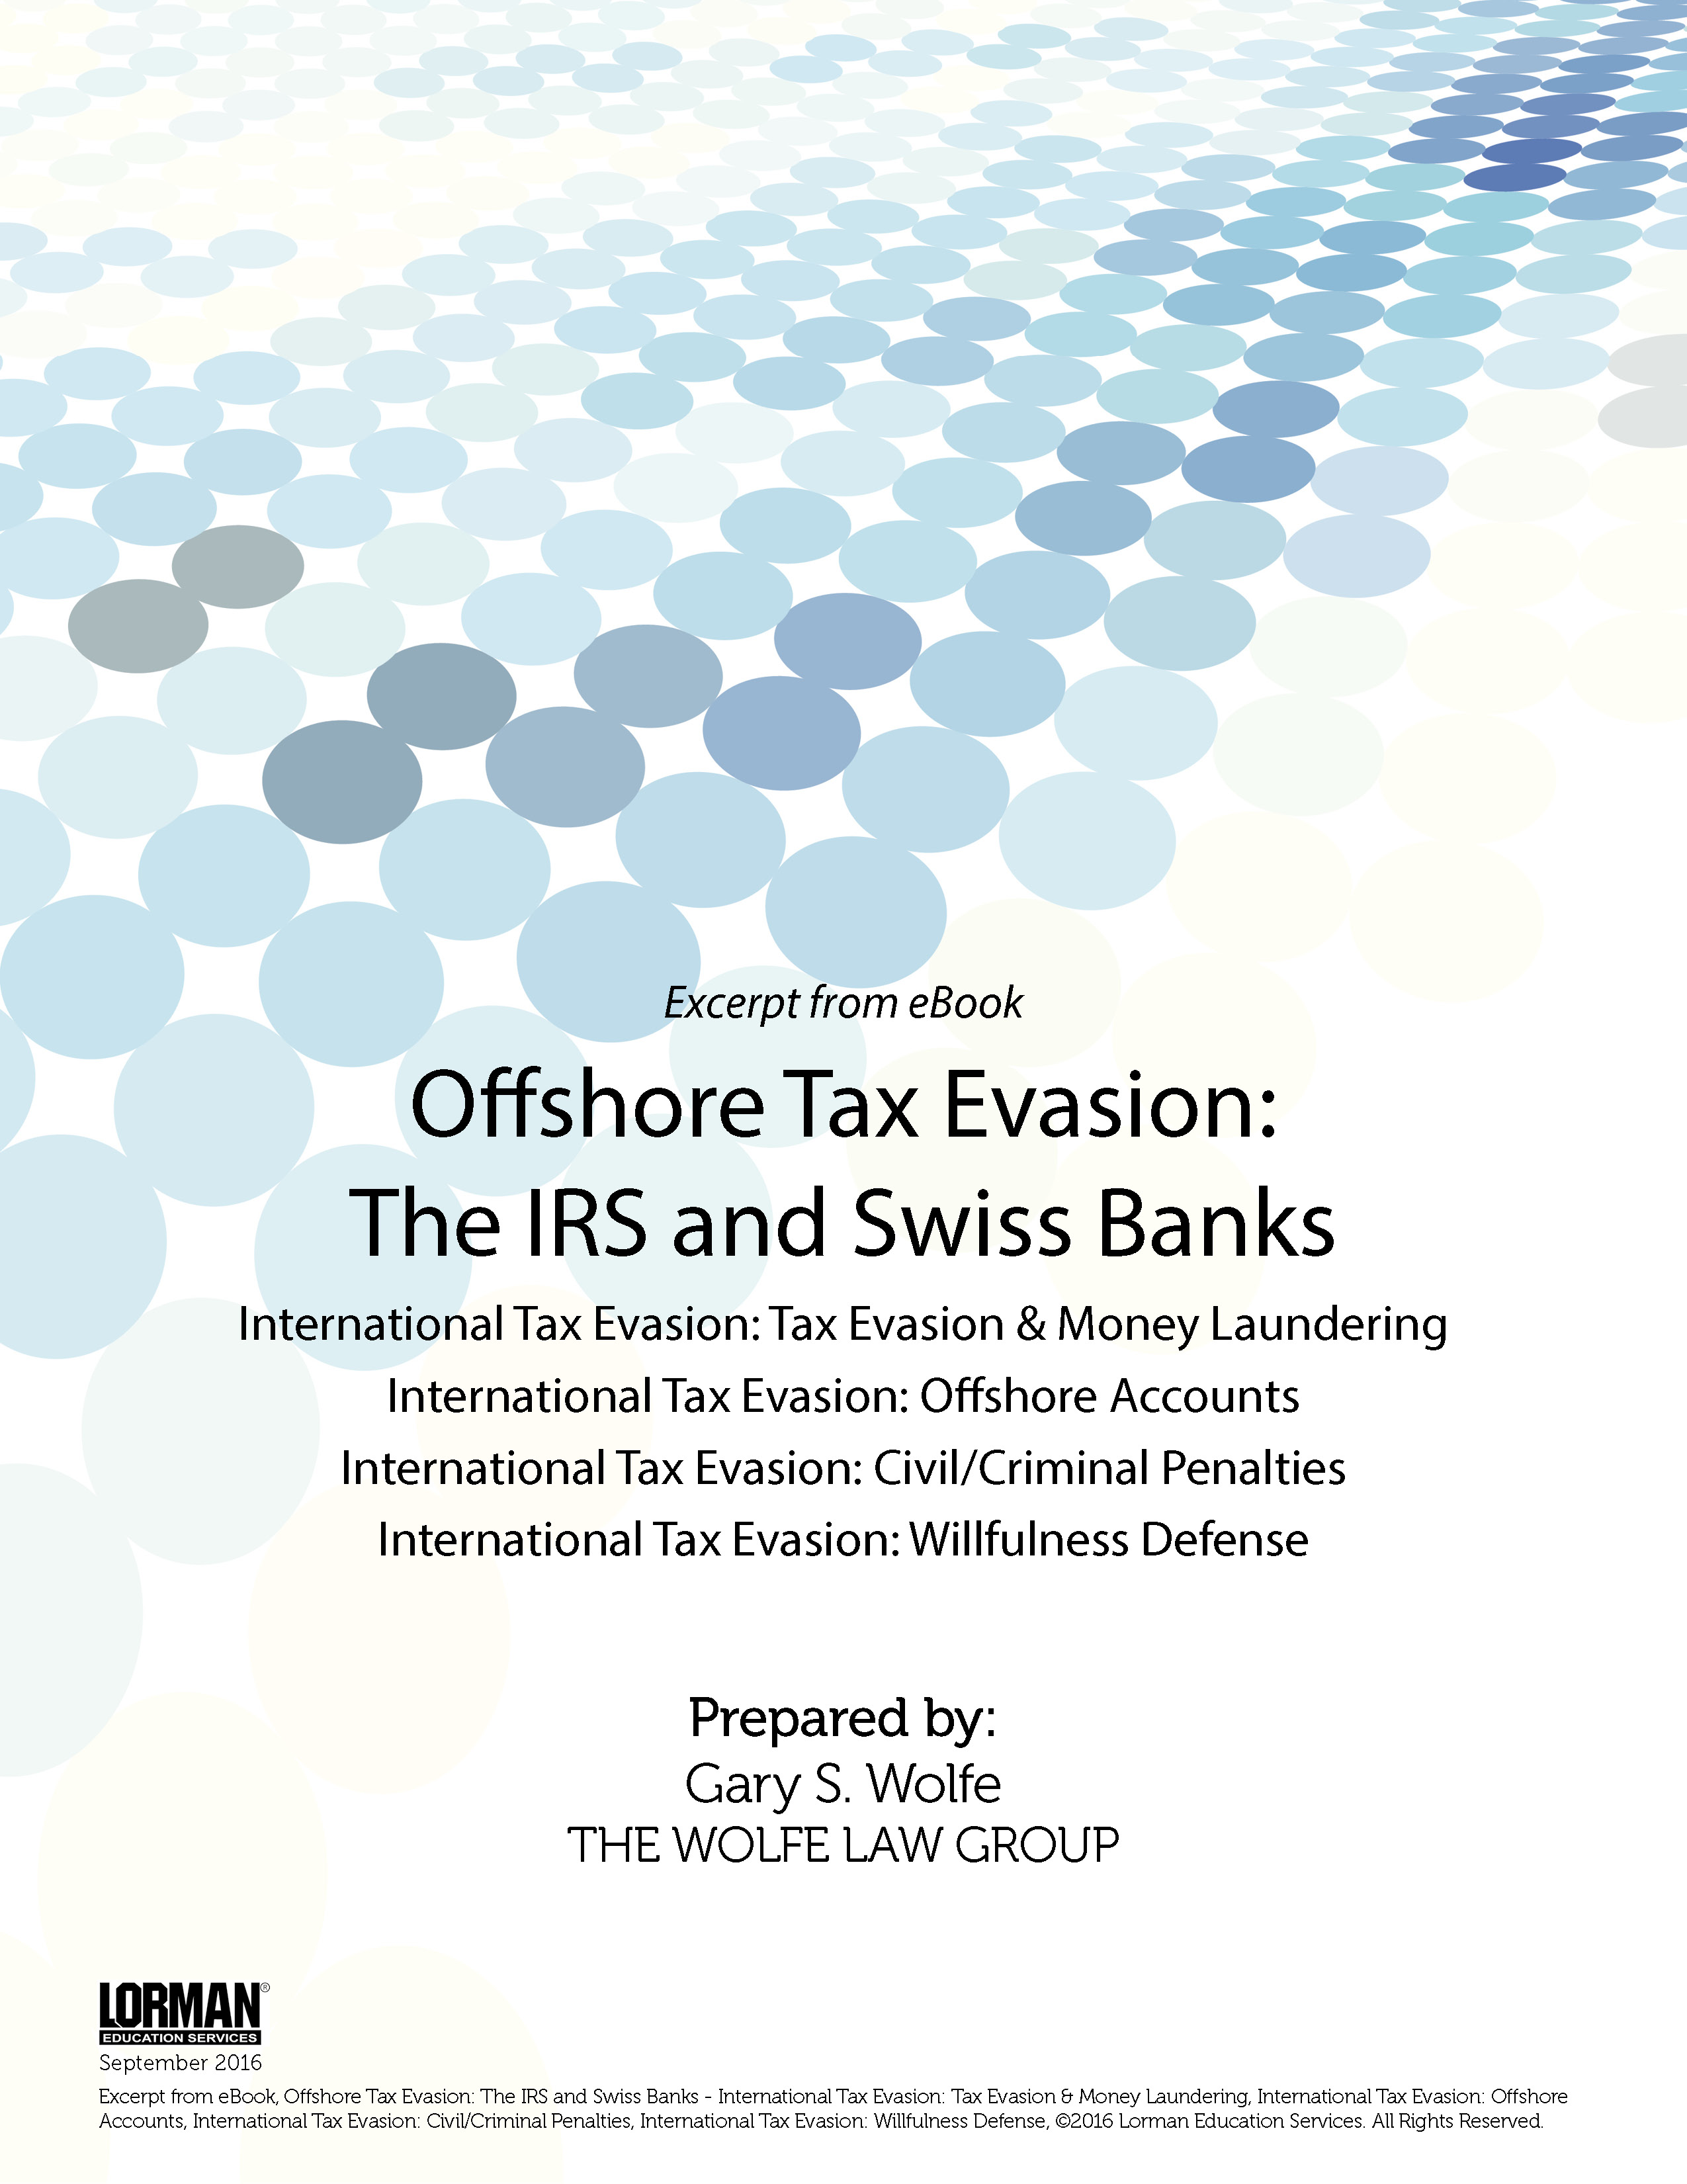 Offshore International Tax Evasion: The IRS and Swiss Banks